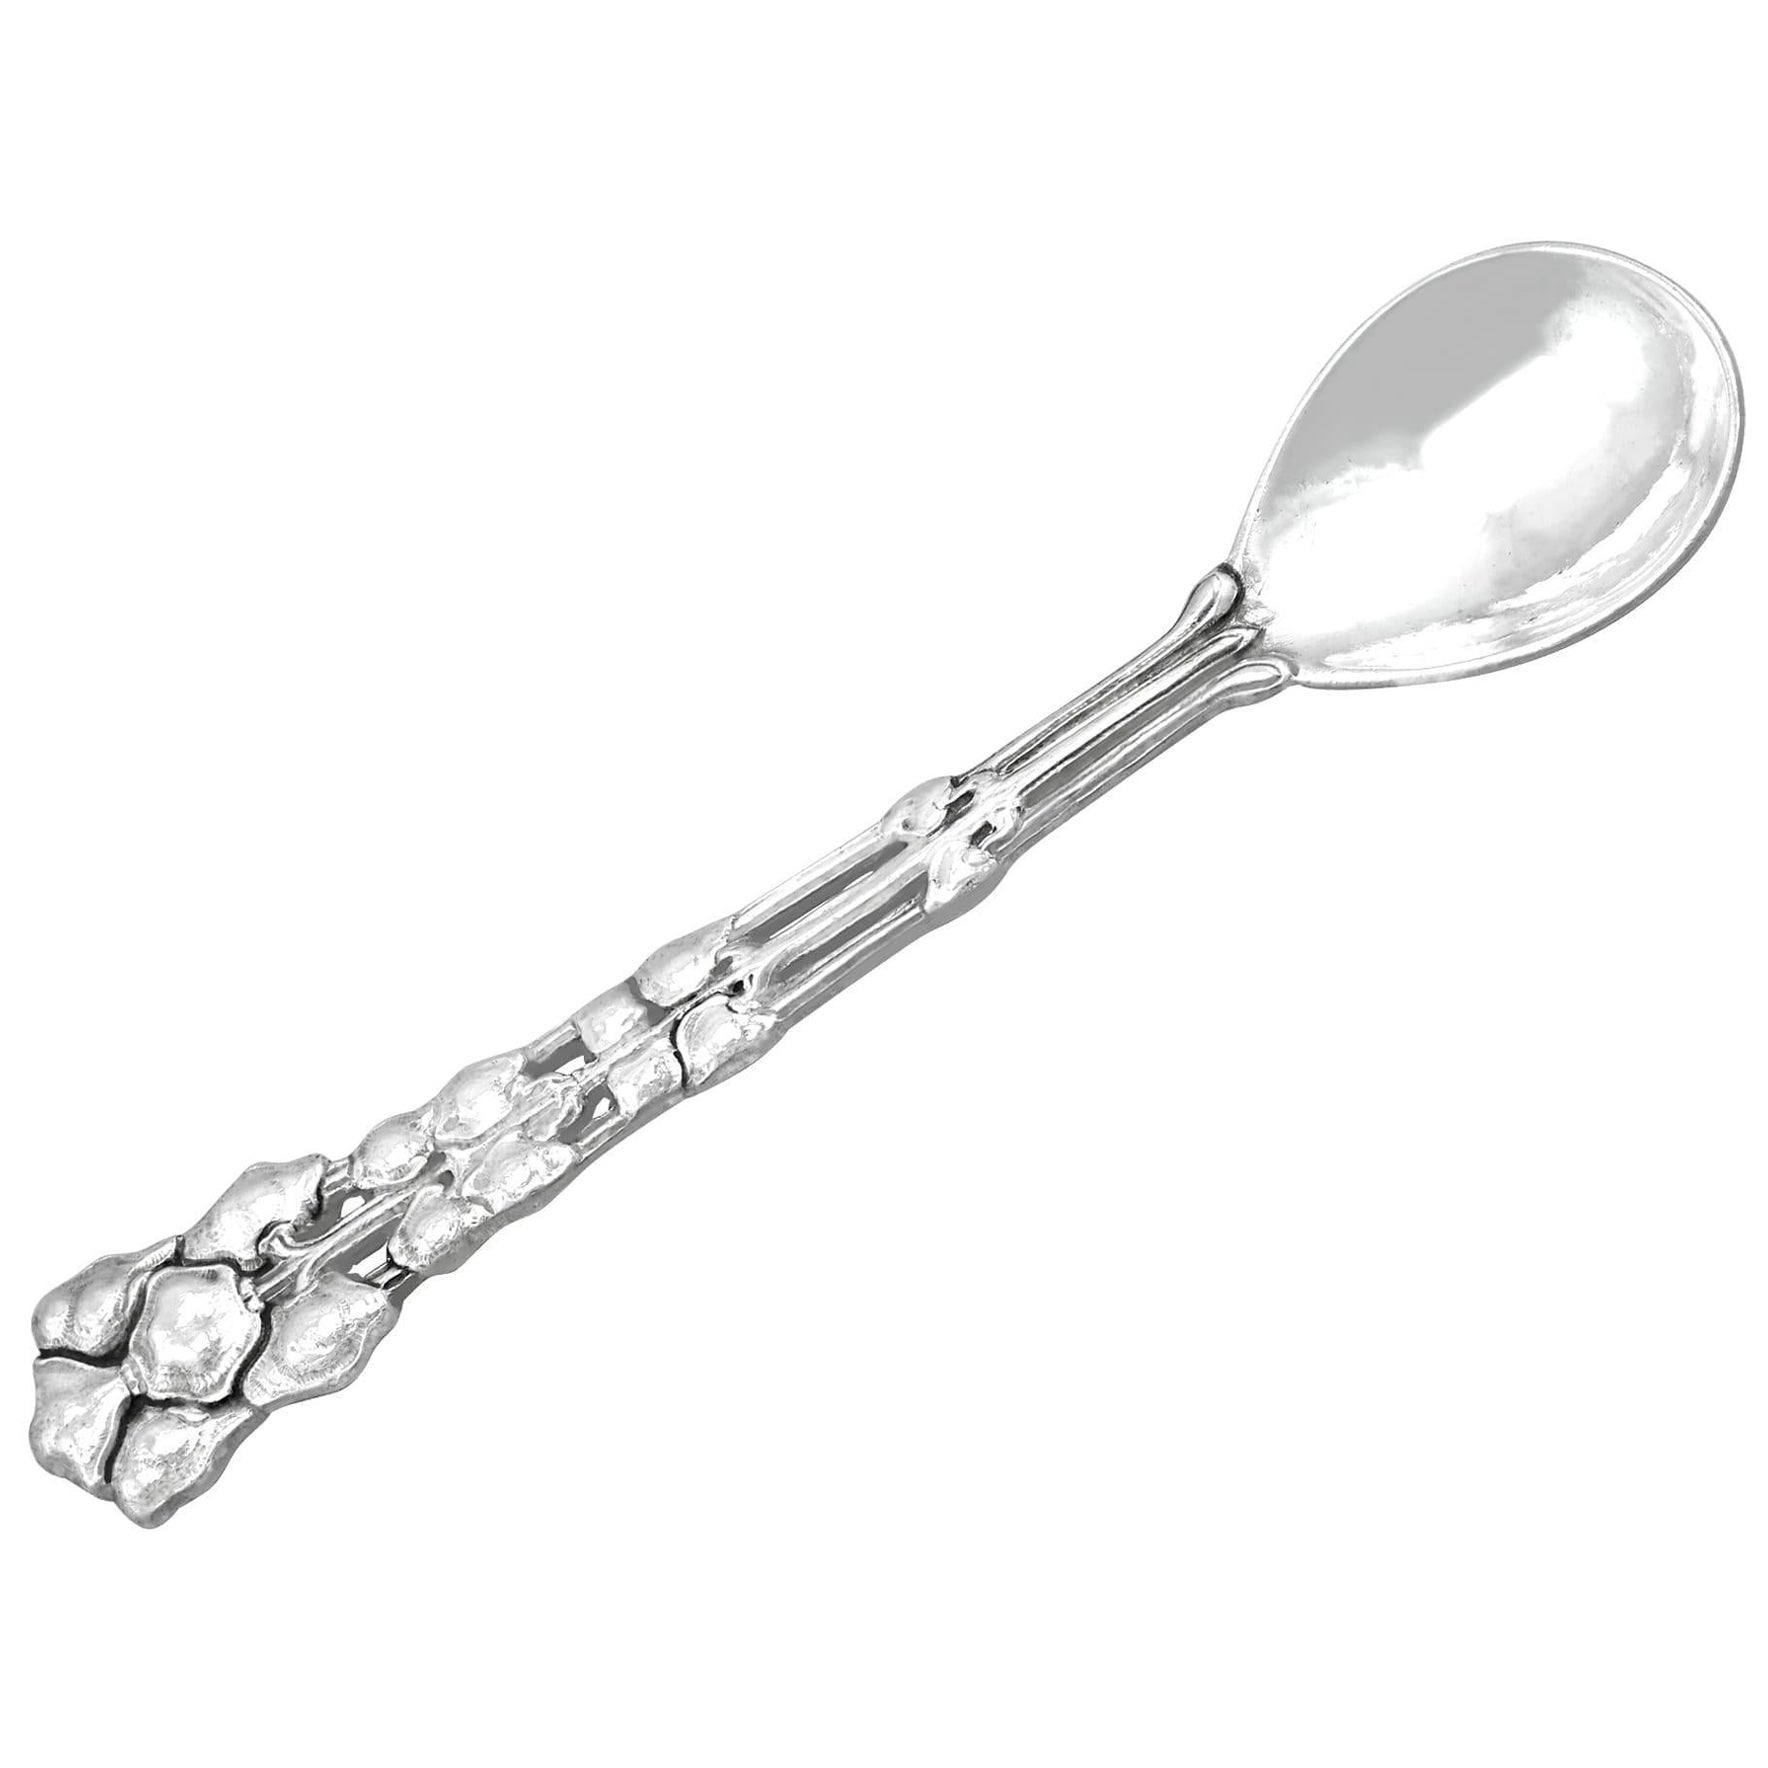 Antique 1920s Sterling Silver Presentation Spoon For Sale